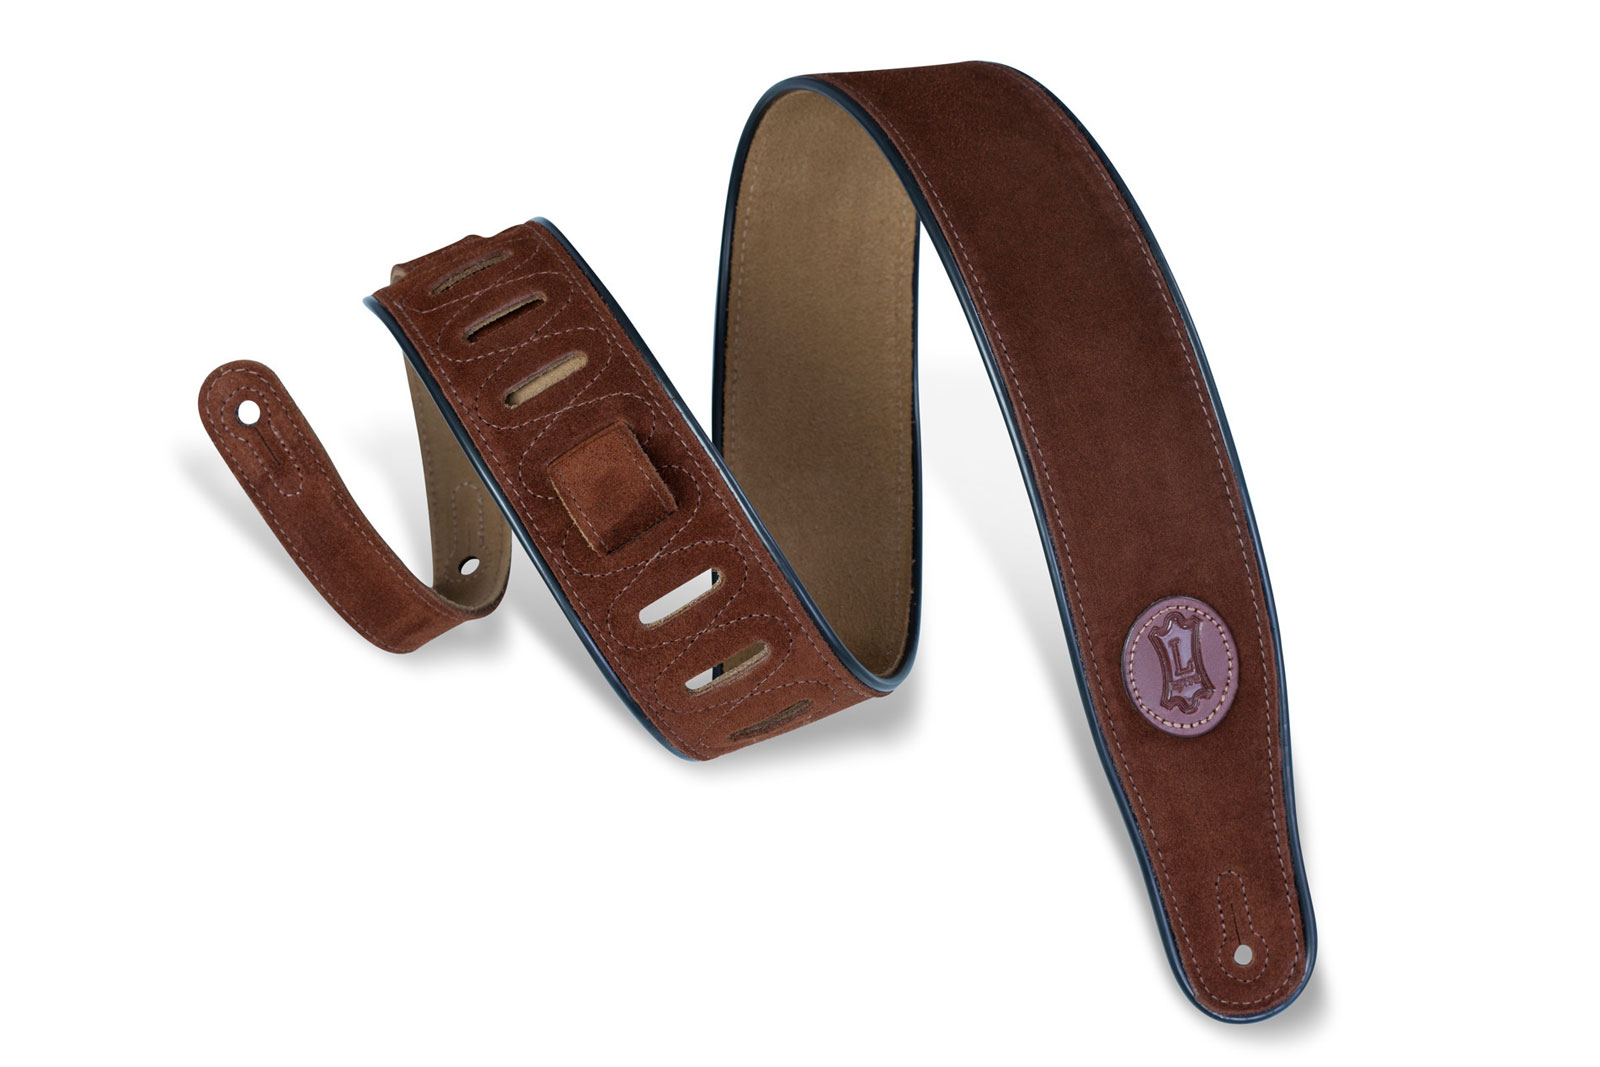 LEVY'S 6.4 CM WITH BLACK BORDER WITH BROWN LEATHER LEVY'S LOGO